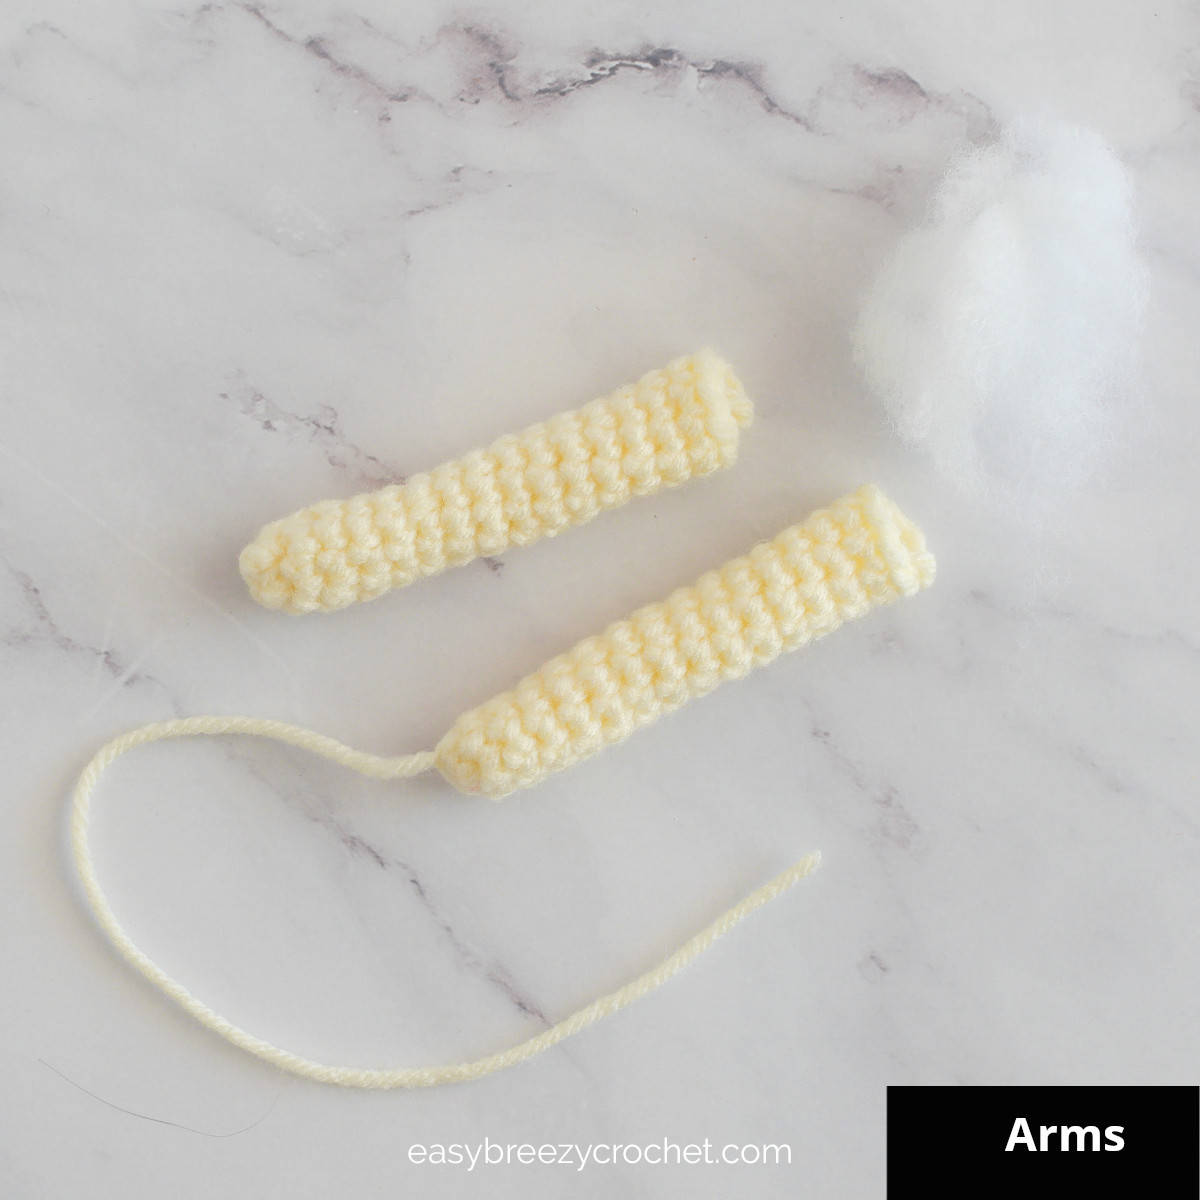 Image of two crocheted arms and toy stuffing.